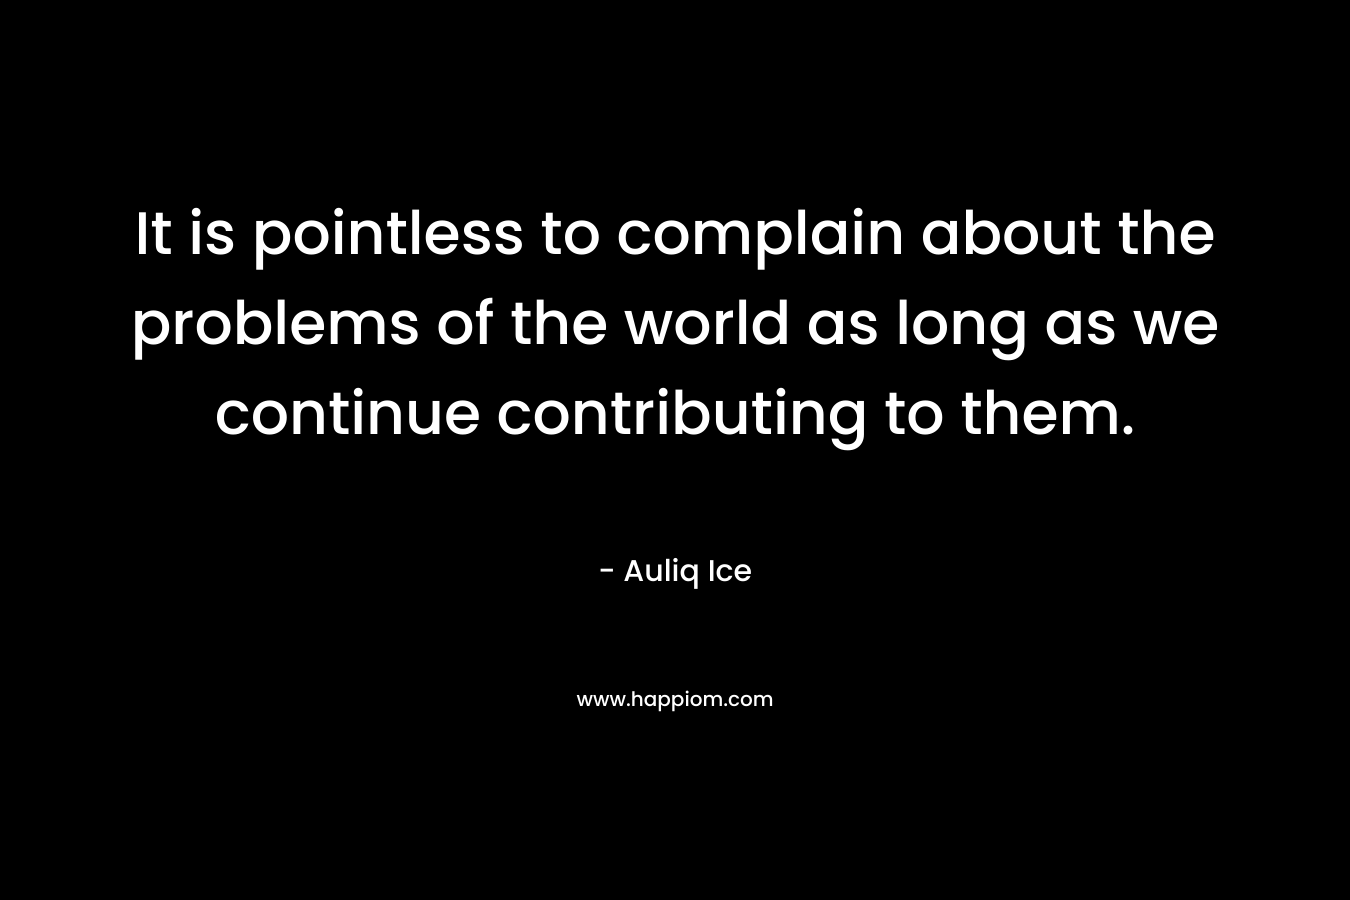 It is pointless to complain about the problems of the world as long as we continue contributing to them. – Auliq Ice